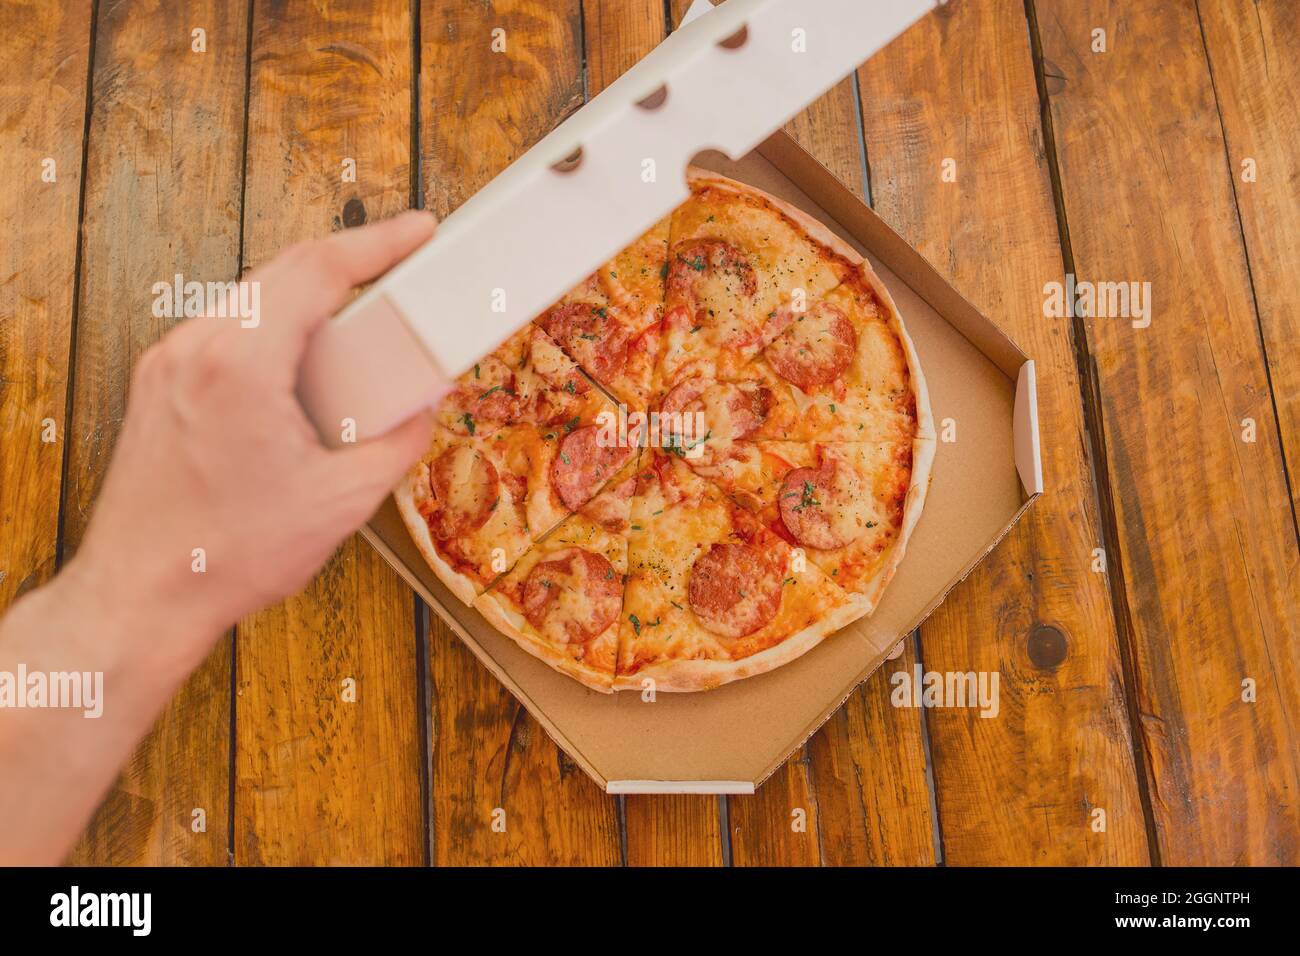 Fresh Hot Pizza In A Pizza Box Stock Photo - Download Image Now